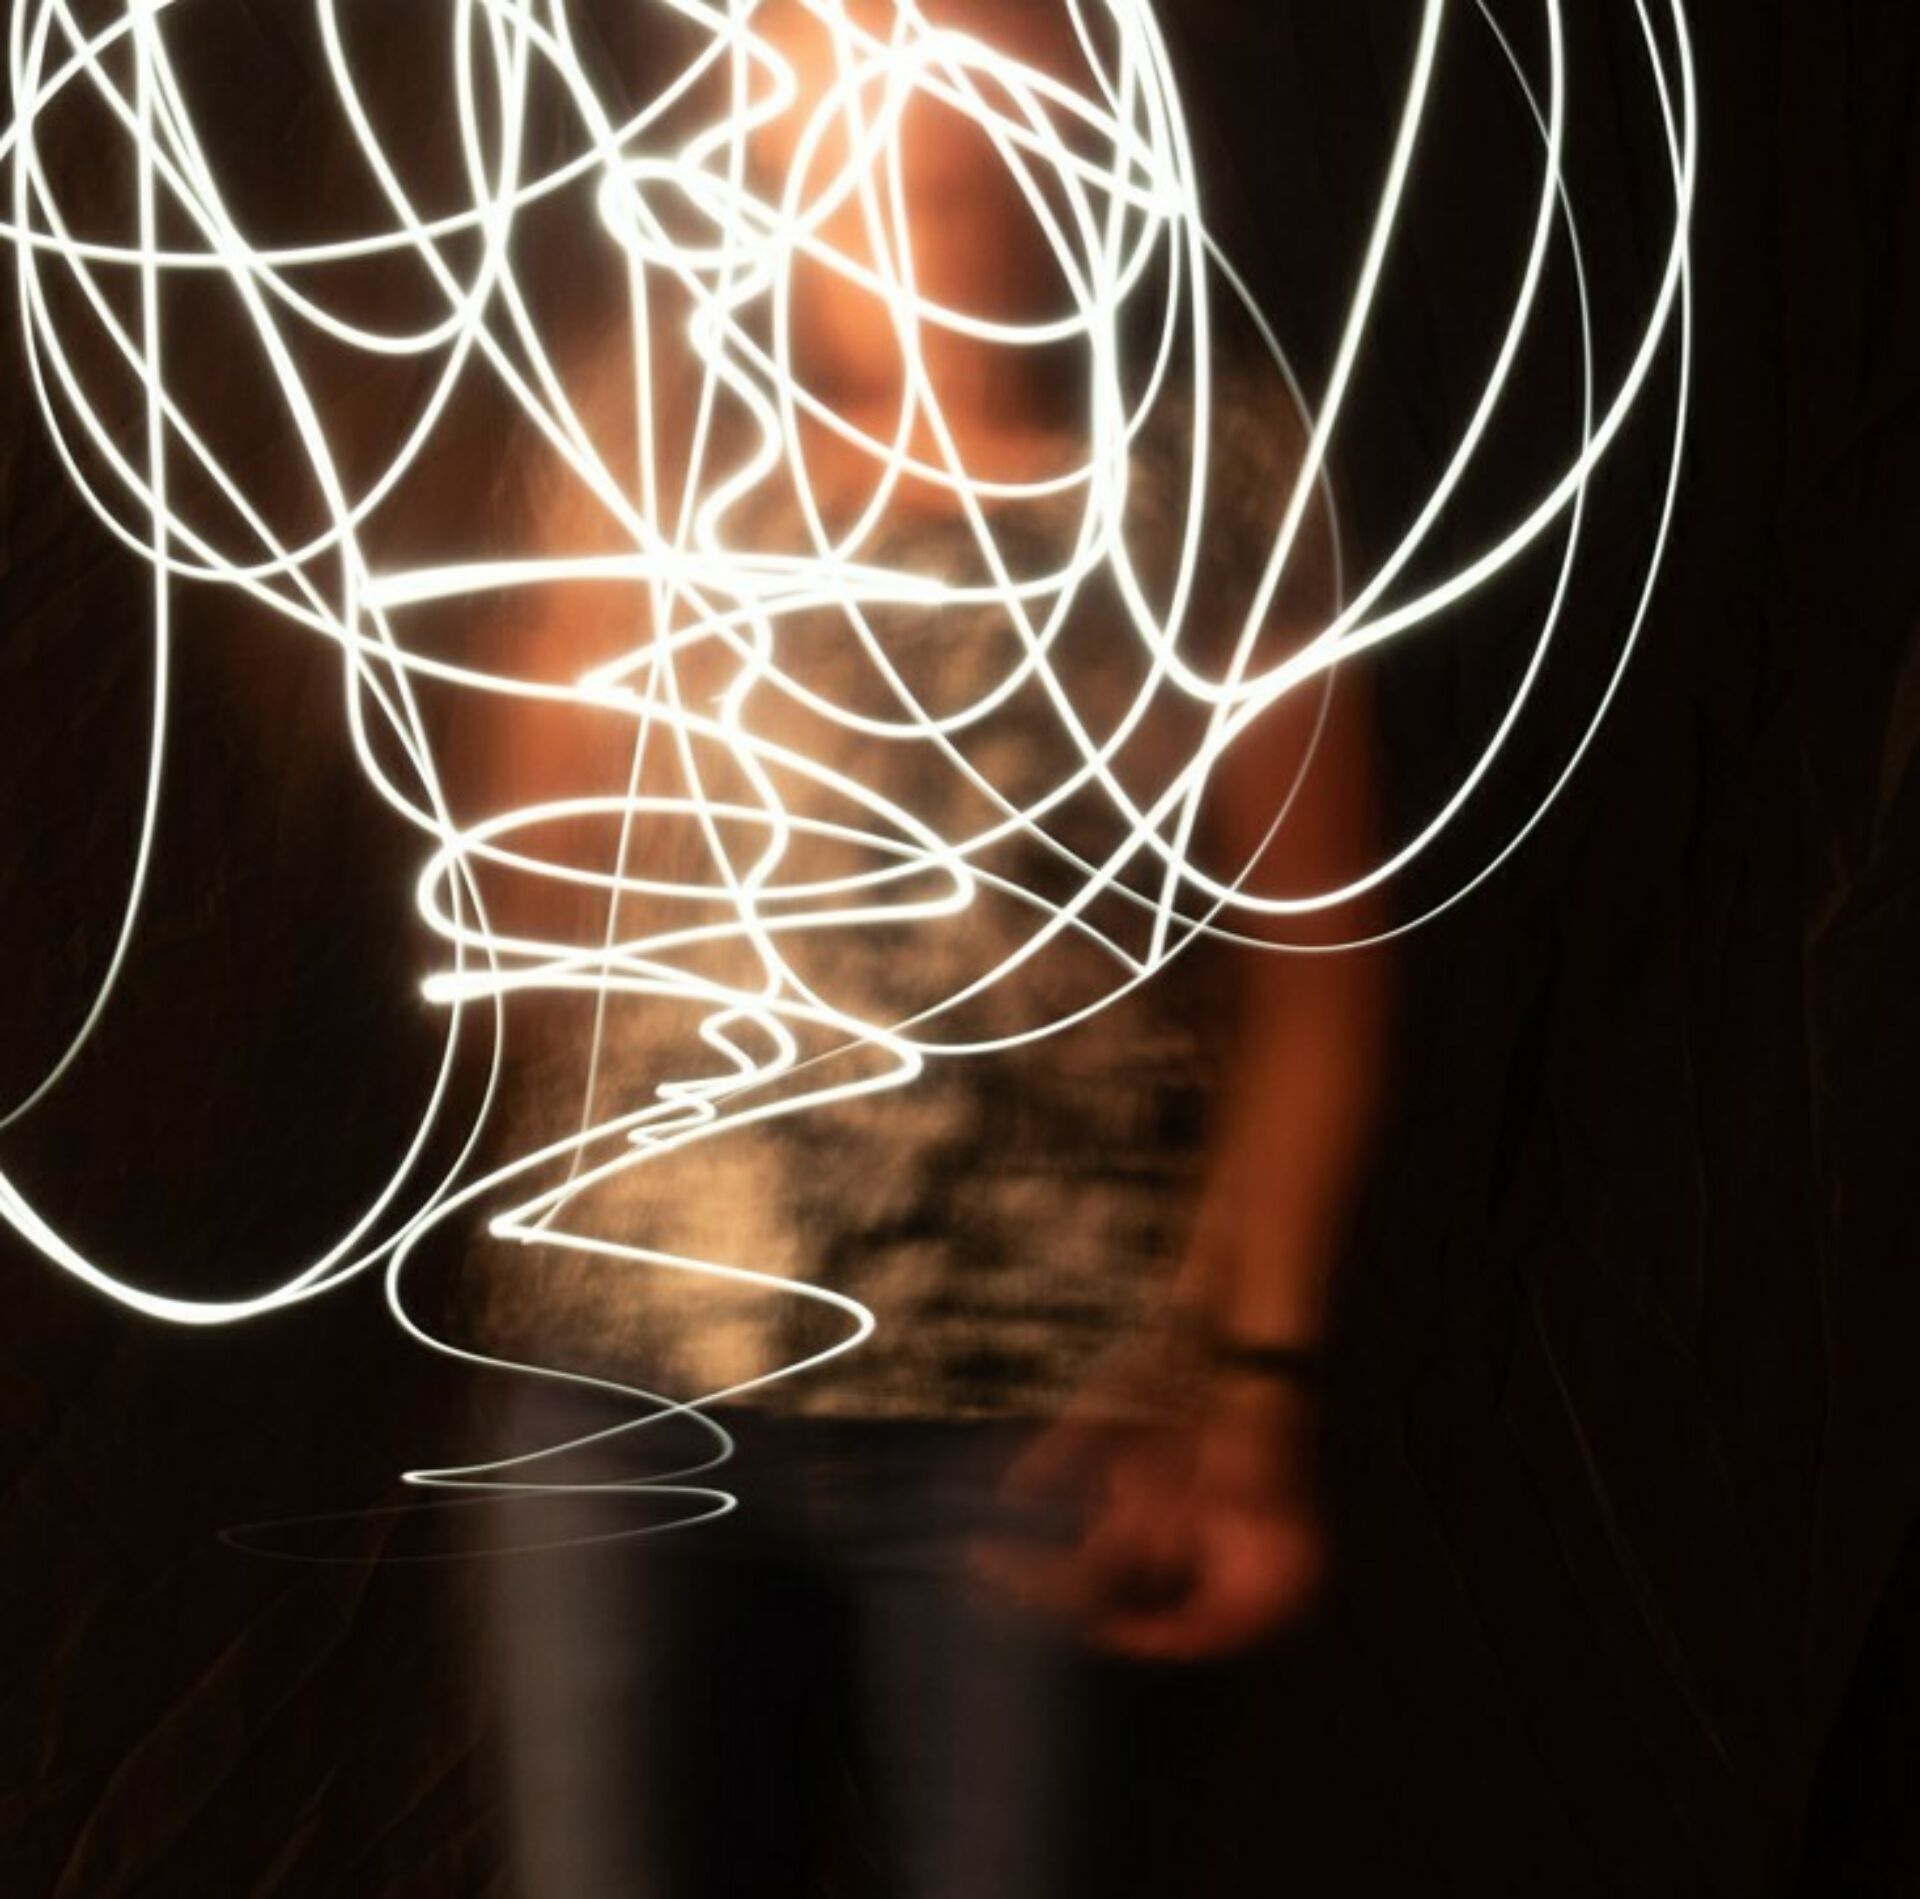 Woskob gallery showcasing interactive light painting by a participant.